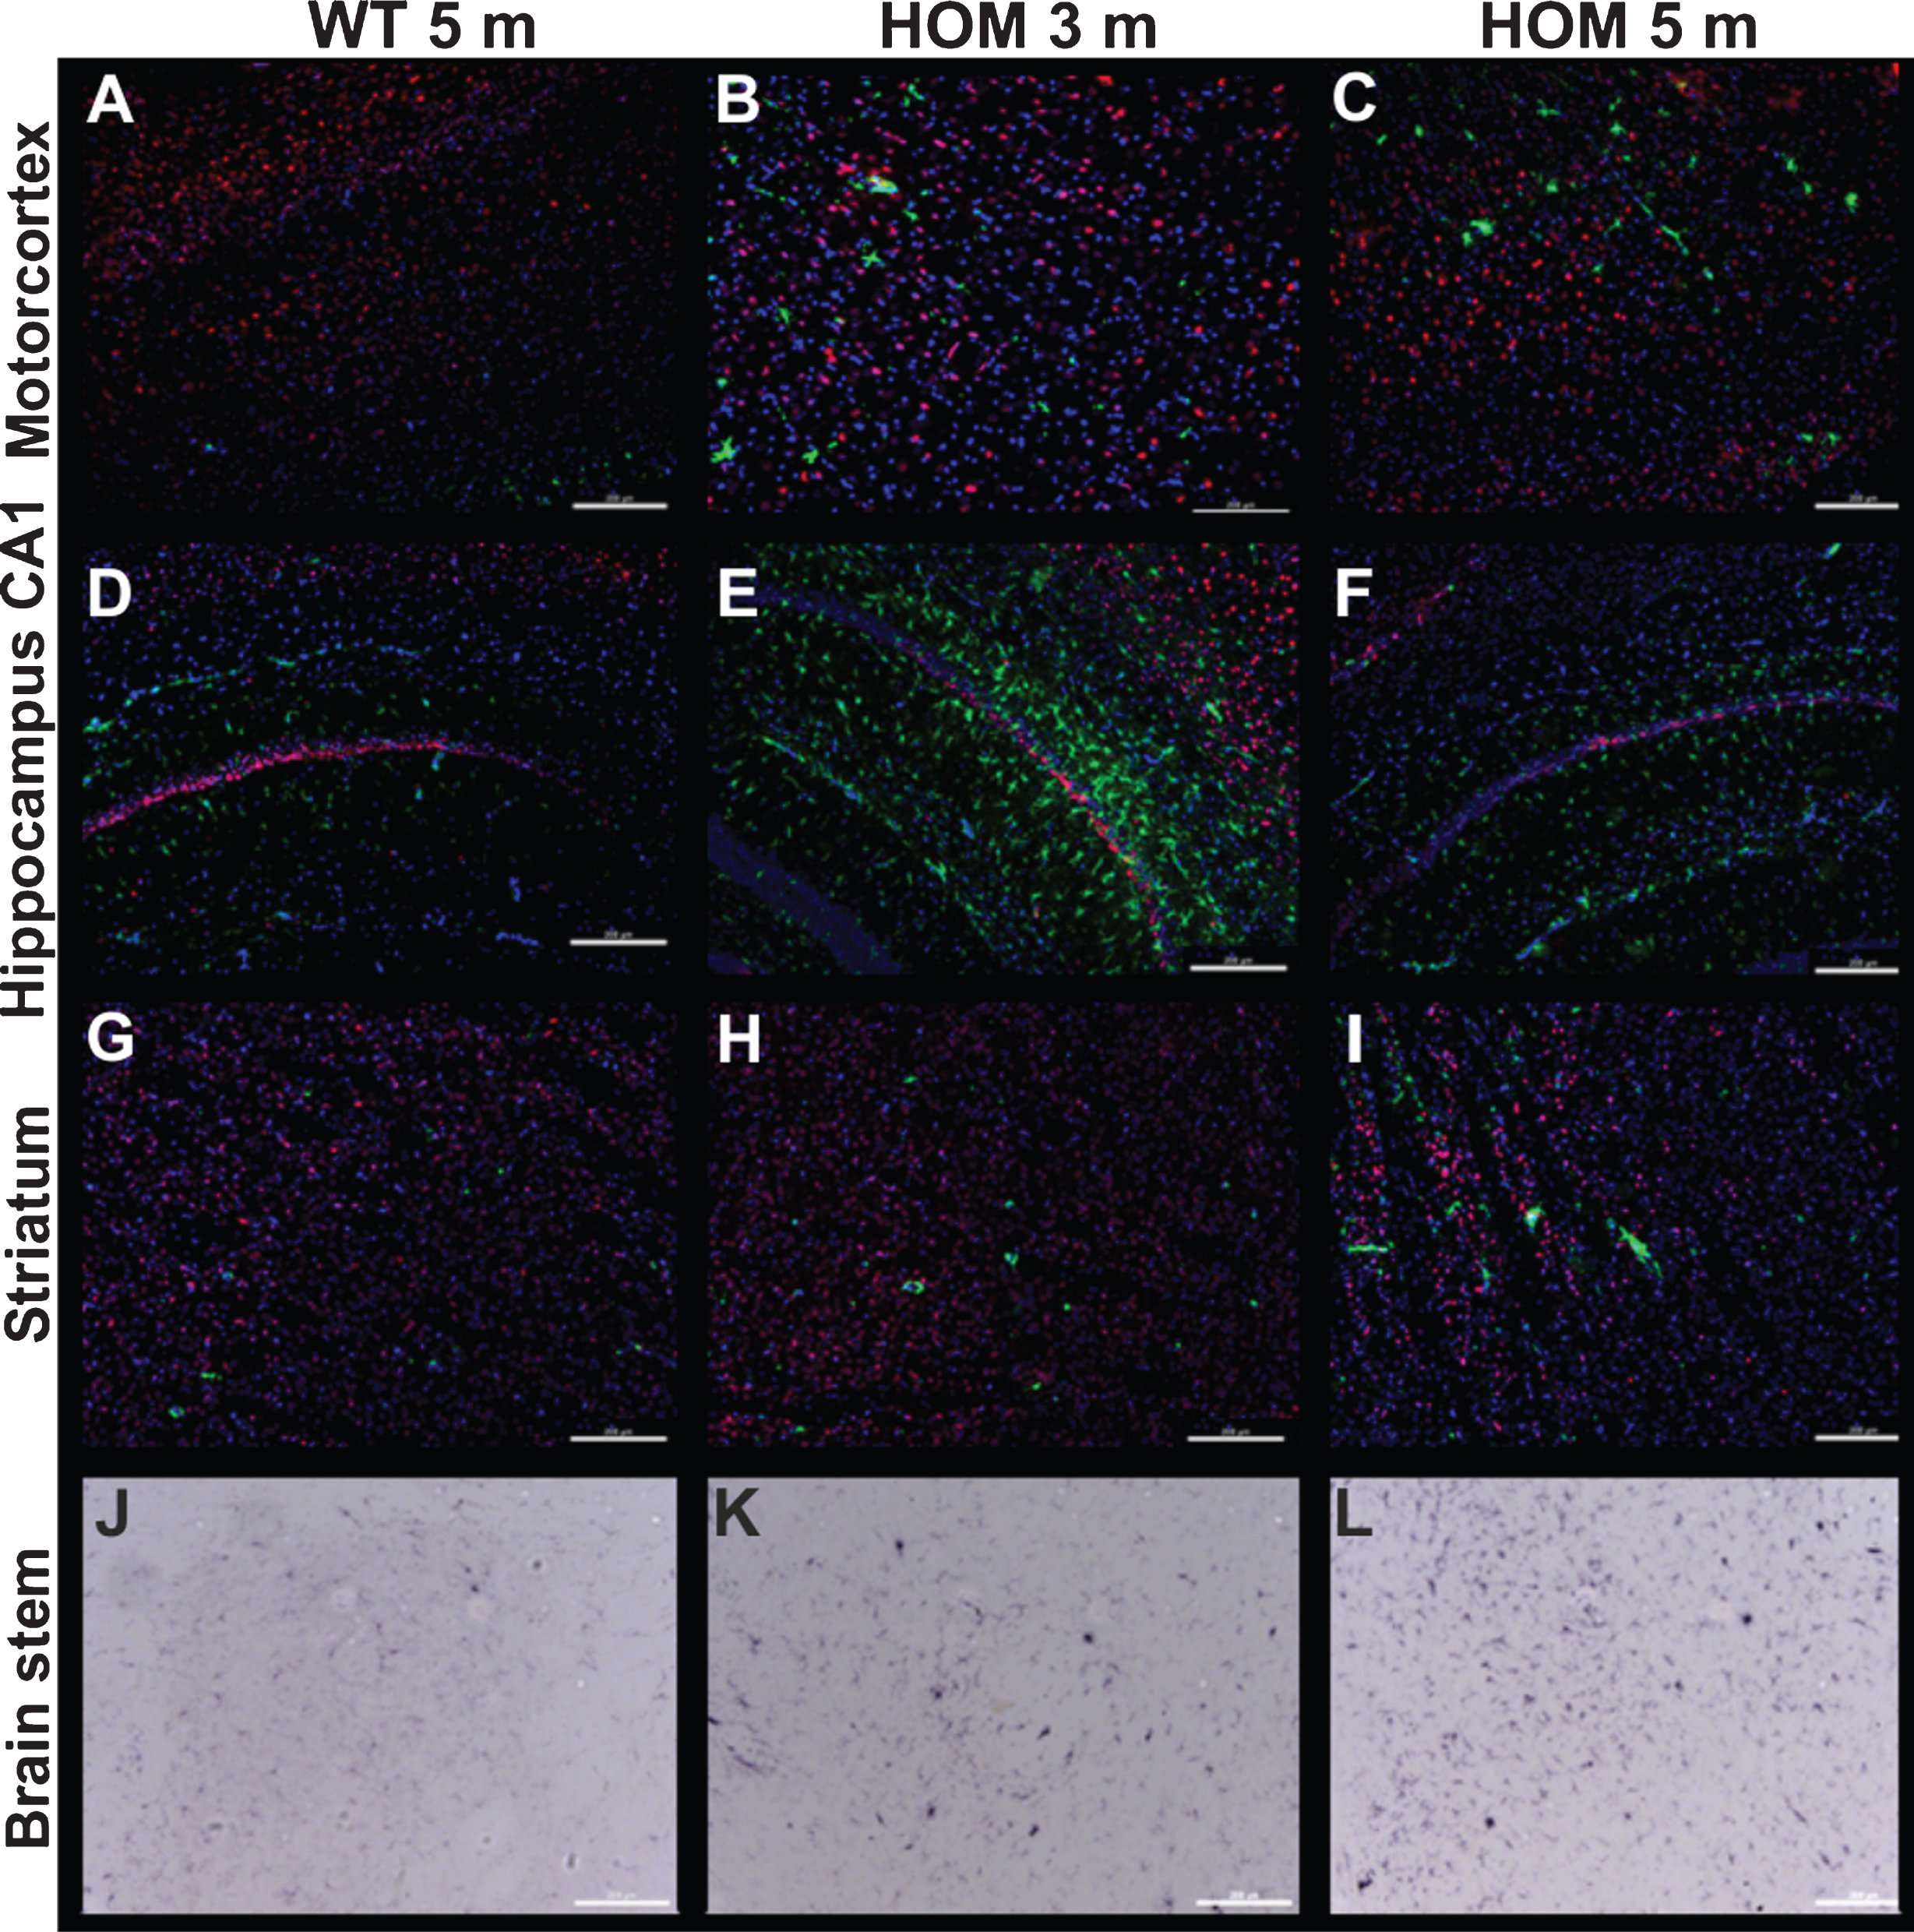 Gliosis and neuronal loss in homozygous TBA2.1 mice. Representative immunofluorescence and bright field images of the motorcortex, CA1 hippocampal region, striatum, and brain stem of a 5 months old wild type (WT), and 3 and 5 months old homozygous (HOM) mice illustrating activated astrocytes (GFAP, green, A-I), activated microglia (CD11b, bright field, J-K) and neuronal nuclei (NeuN, red, A-I). Counterstaining was performed with DAPI (A-I).